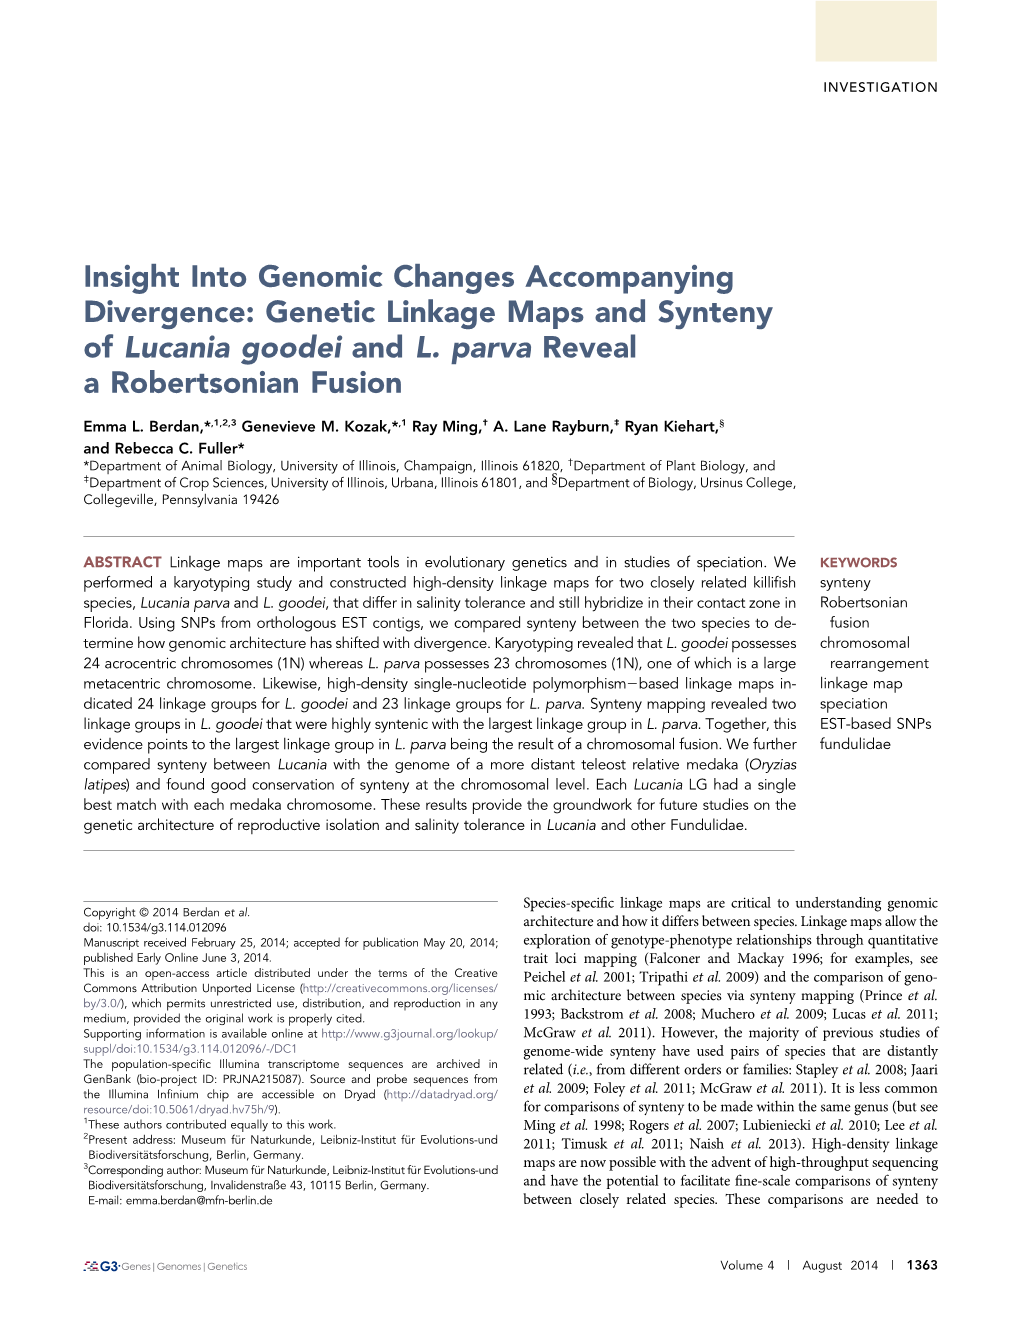 Genetic Linkage Maps and Synteny of Lucania Goodei and L